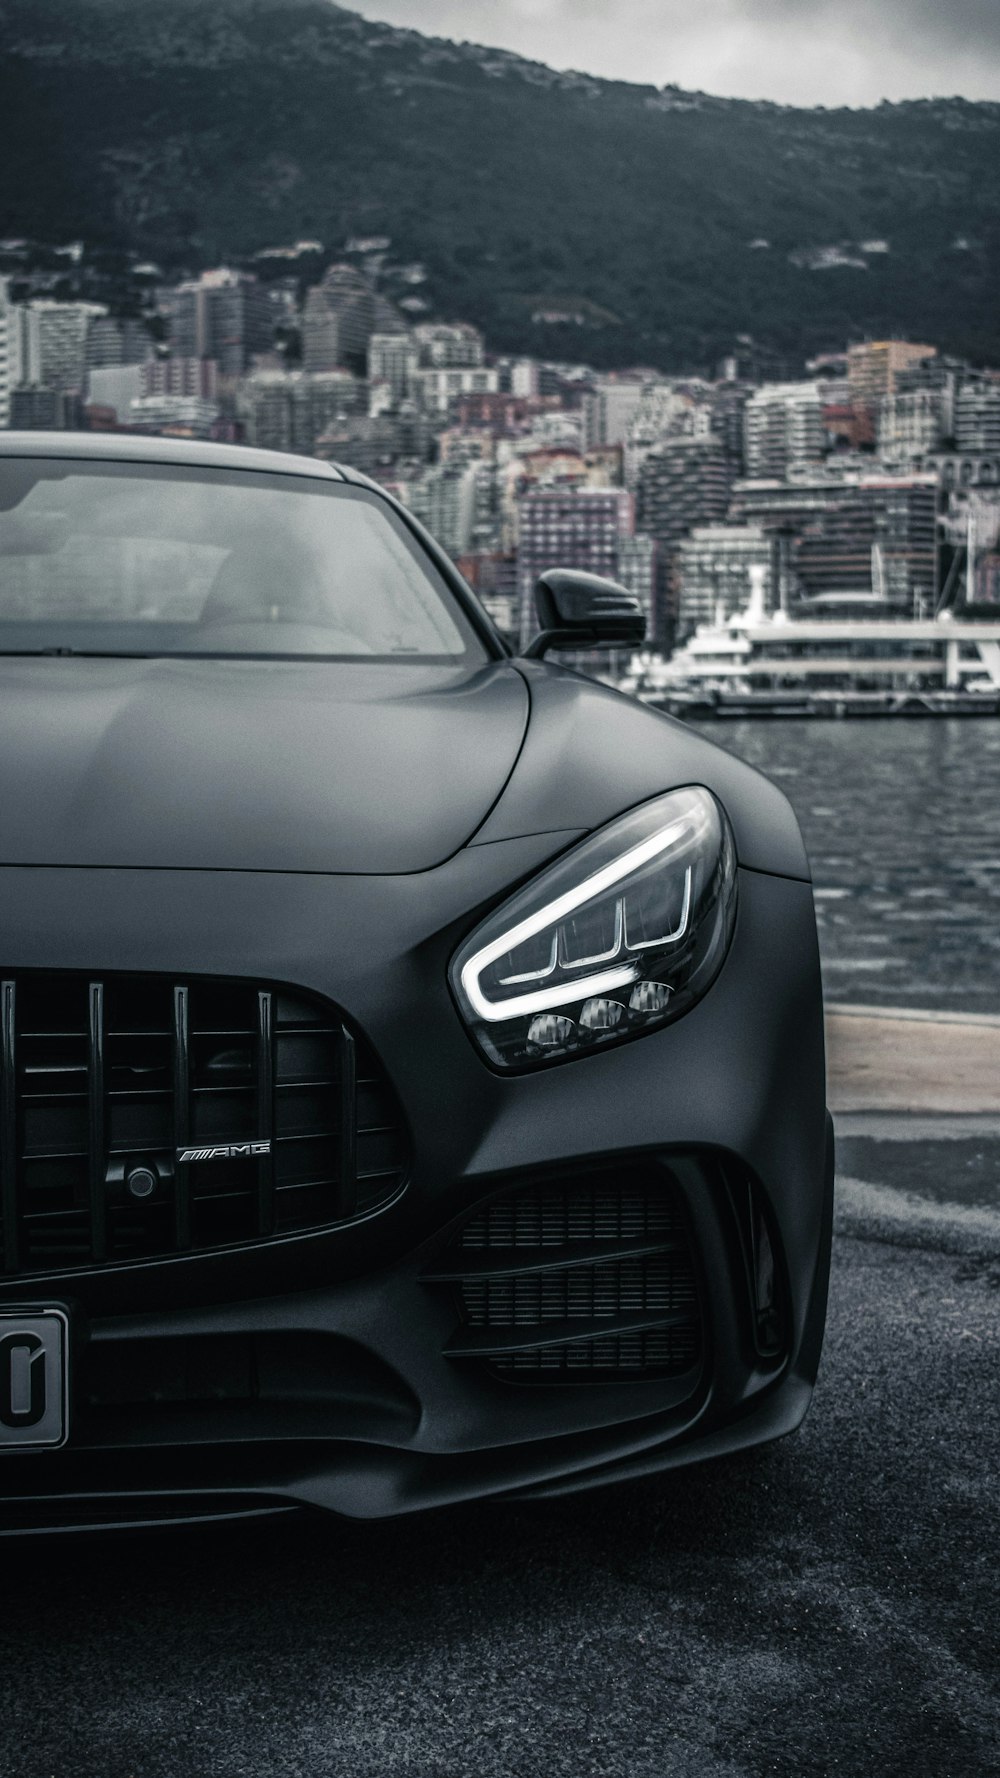 Amg Pictures | Download Free Images on Unsplash